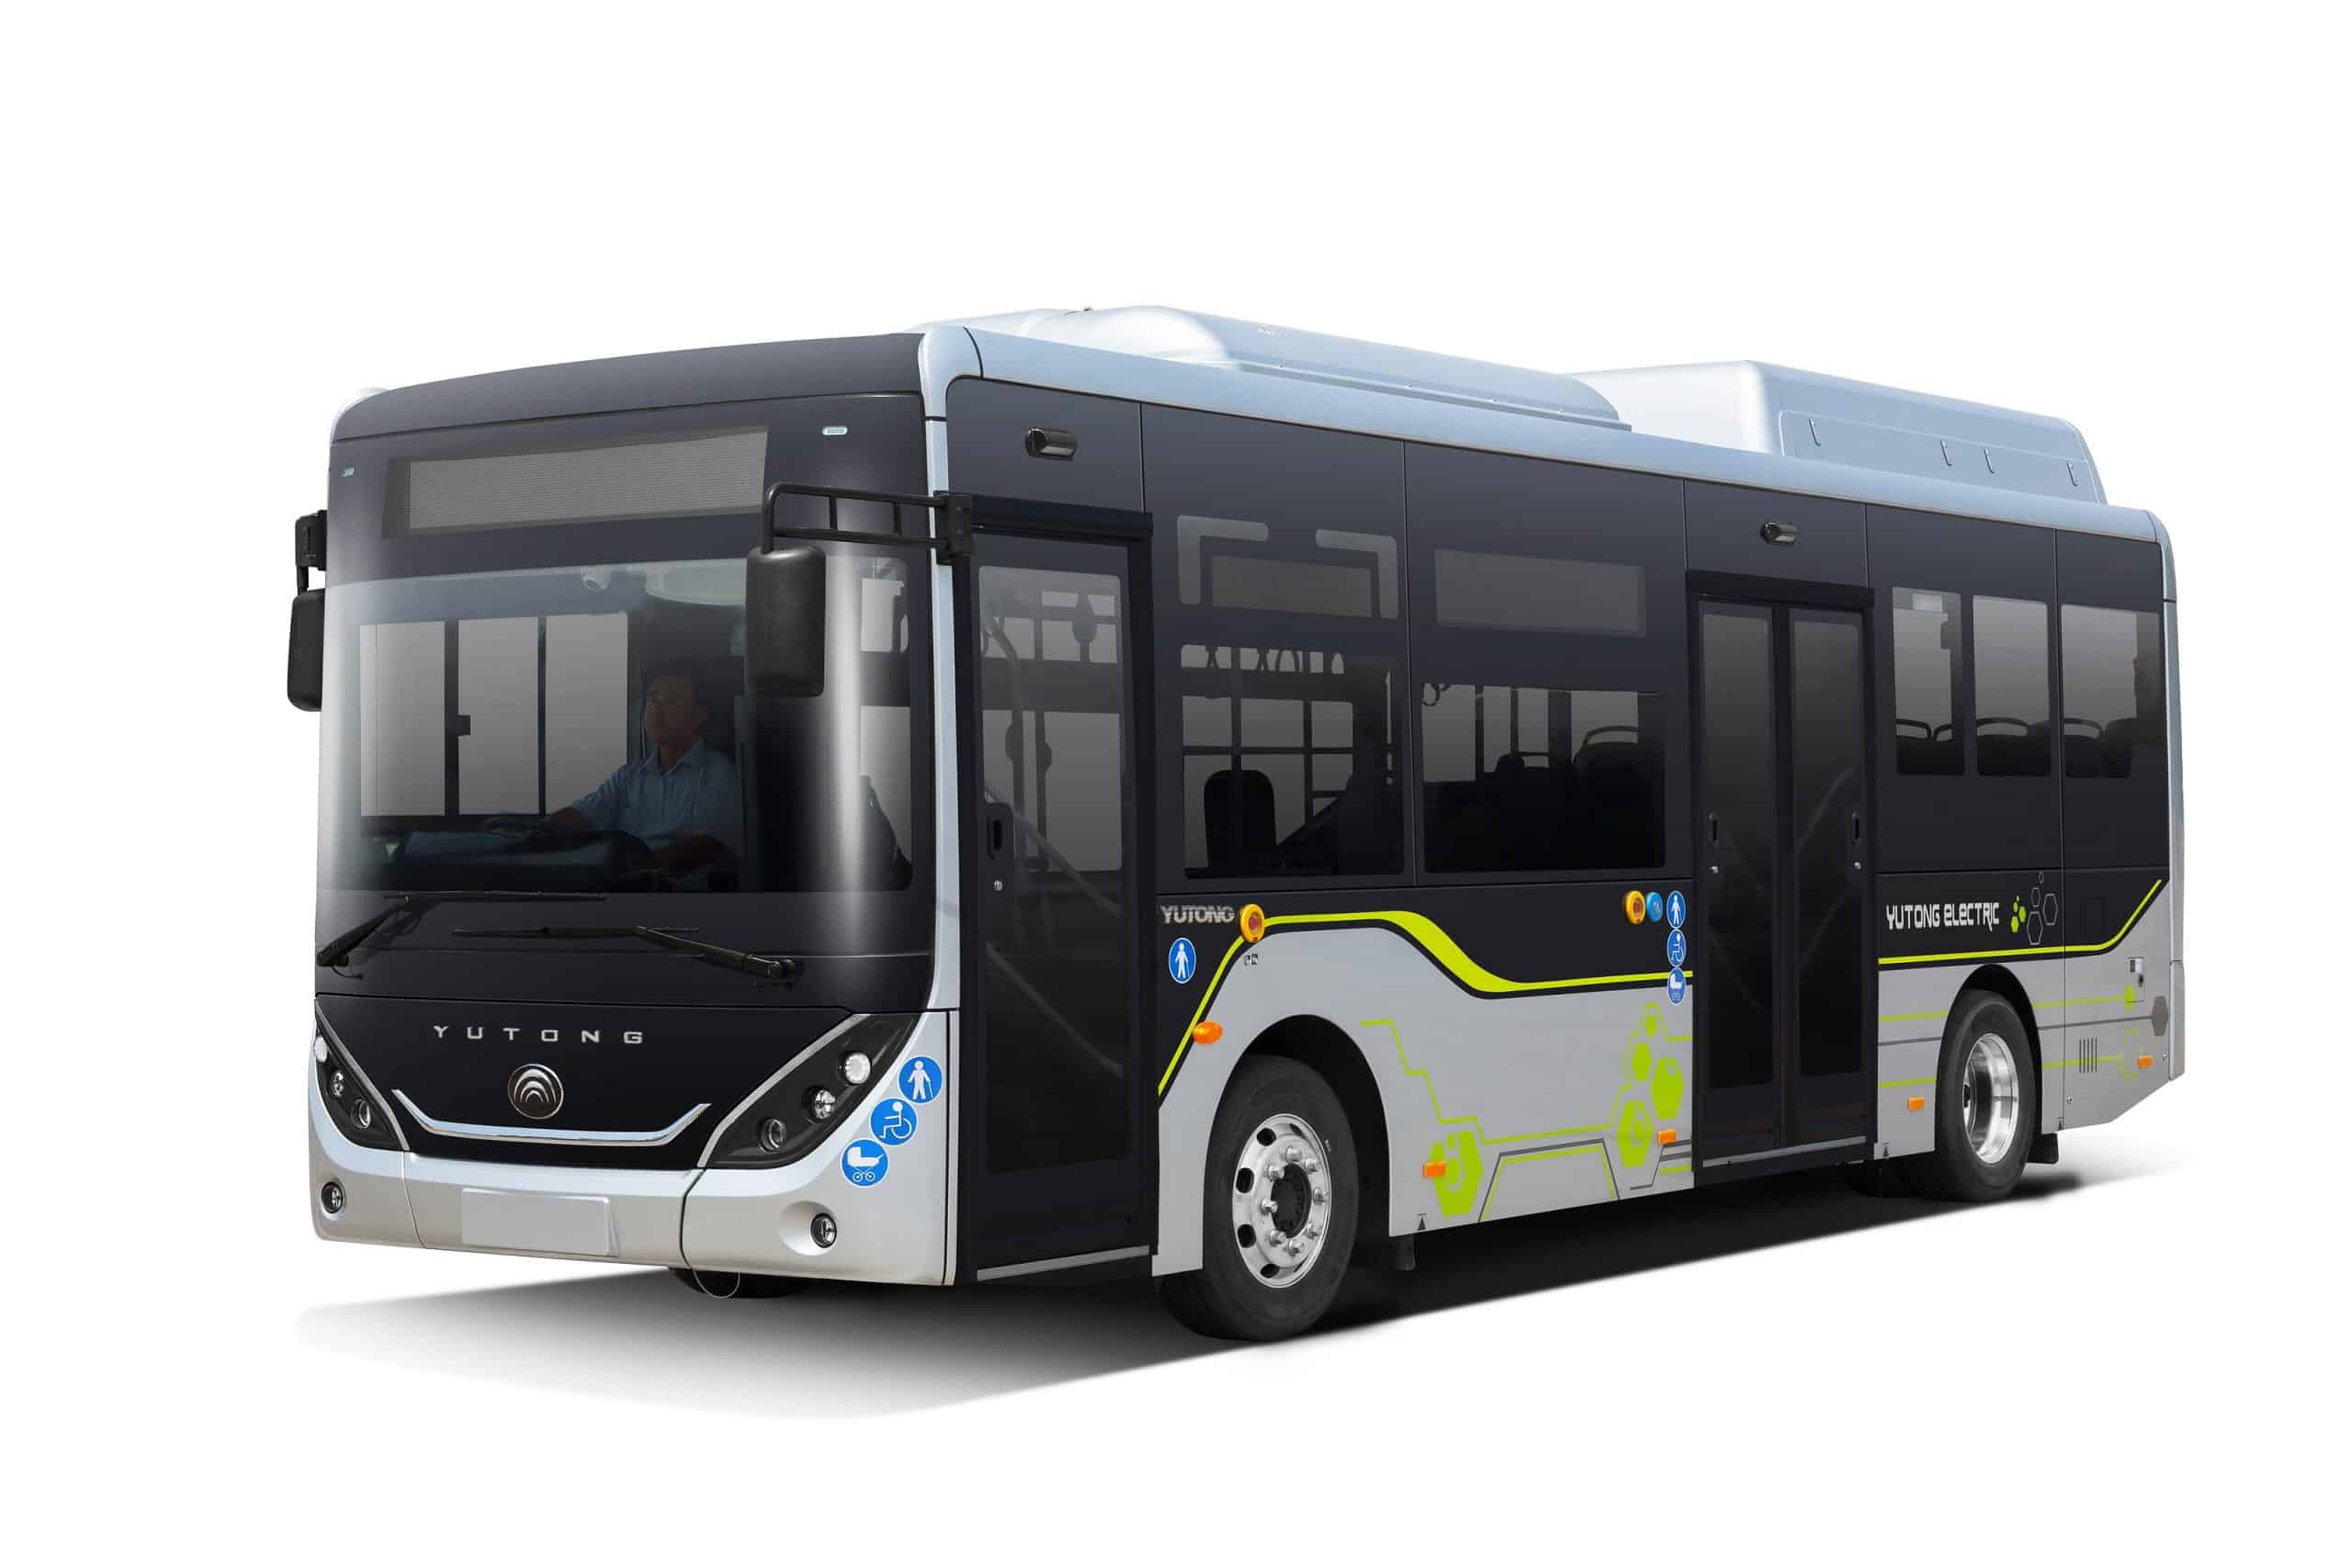 Yutong E9 electric bus coming to the UK